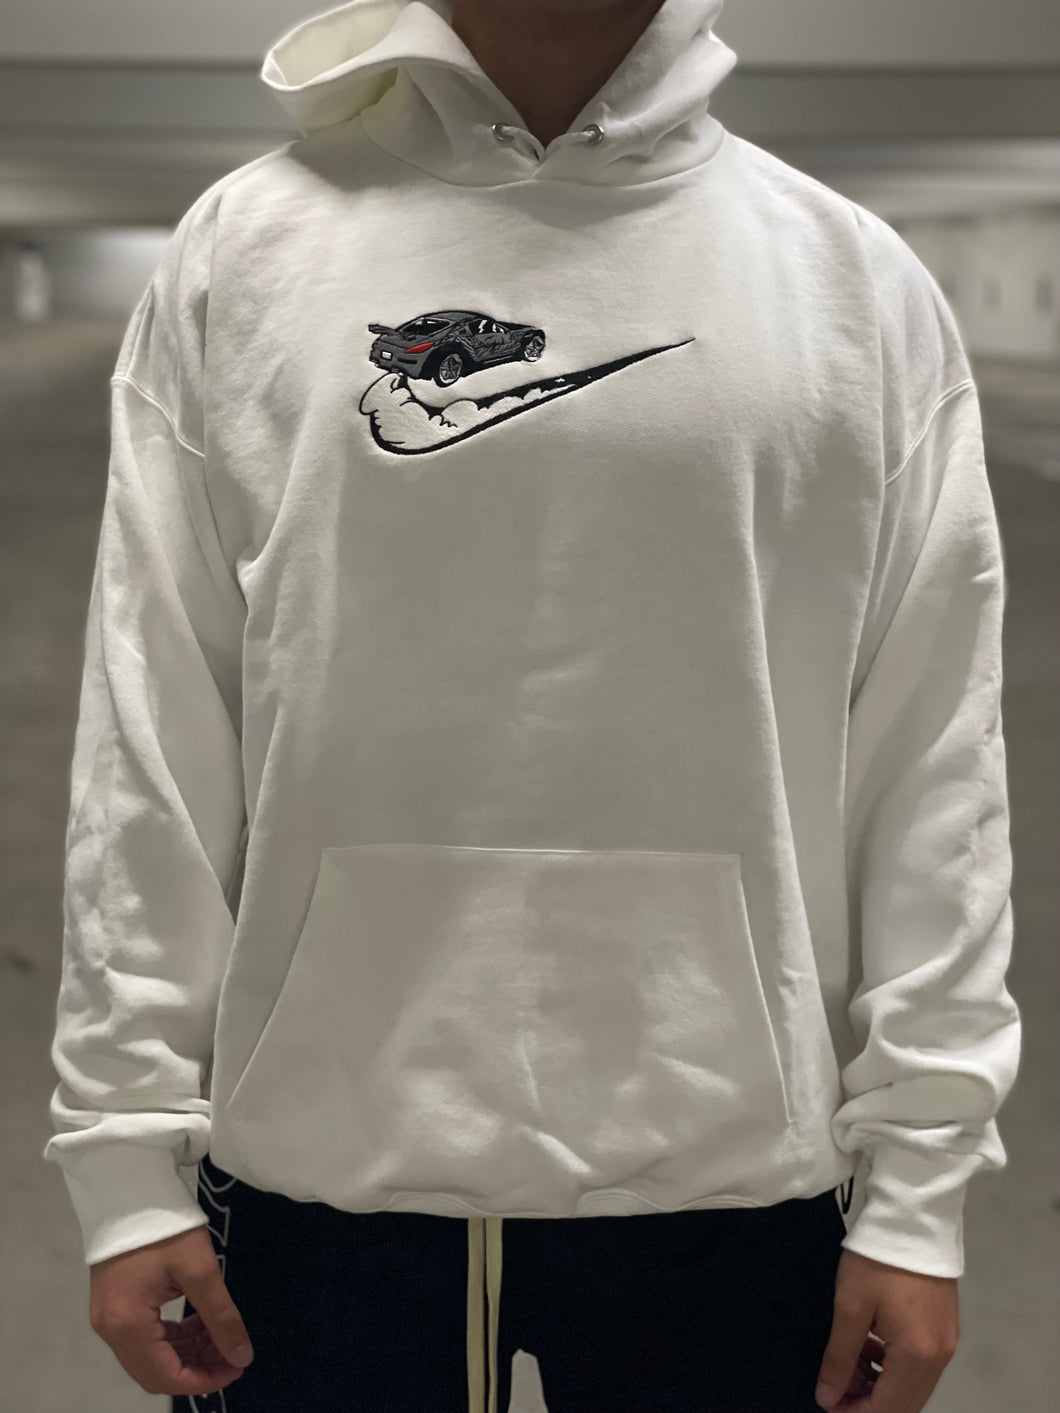 DK's 350Z Embroidered Crewneck/Hoodie - White